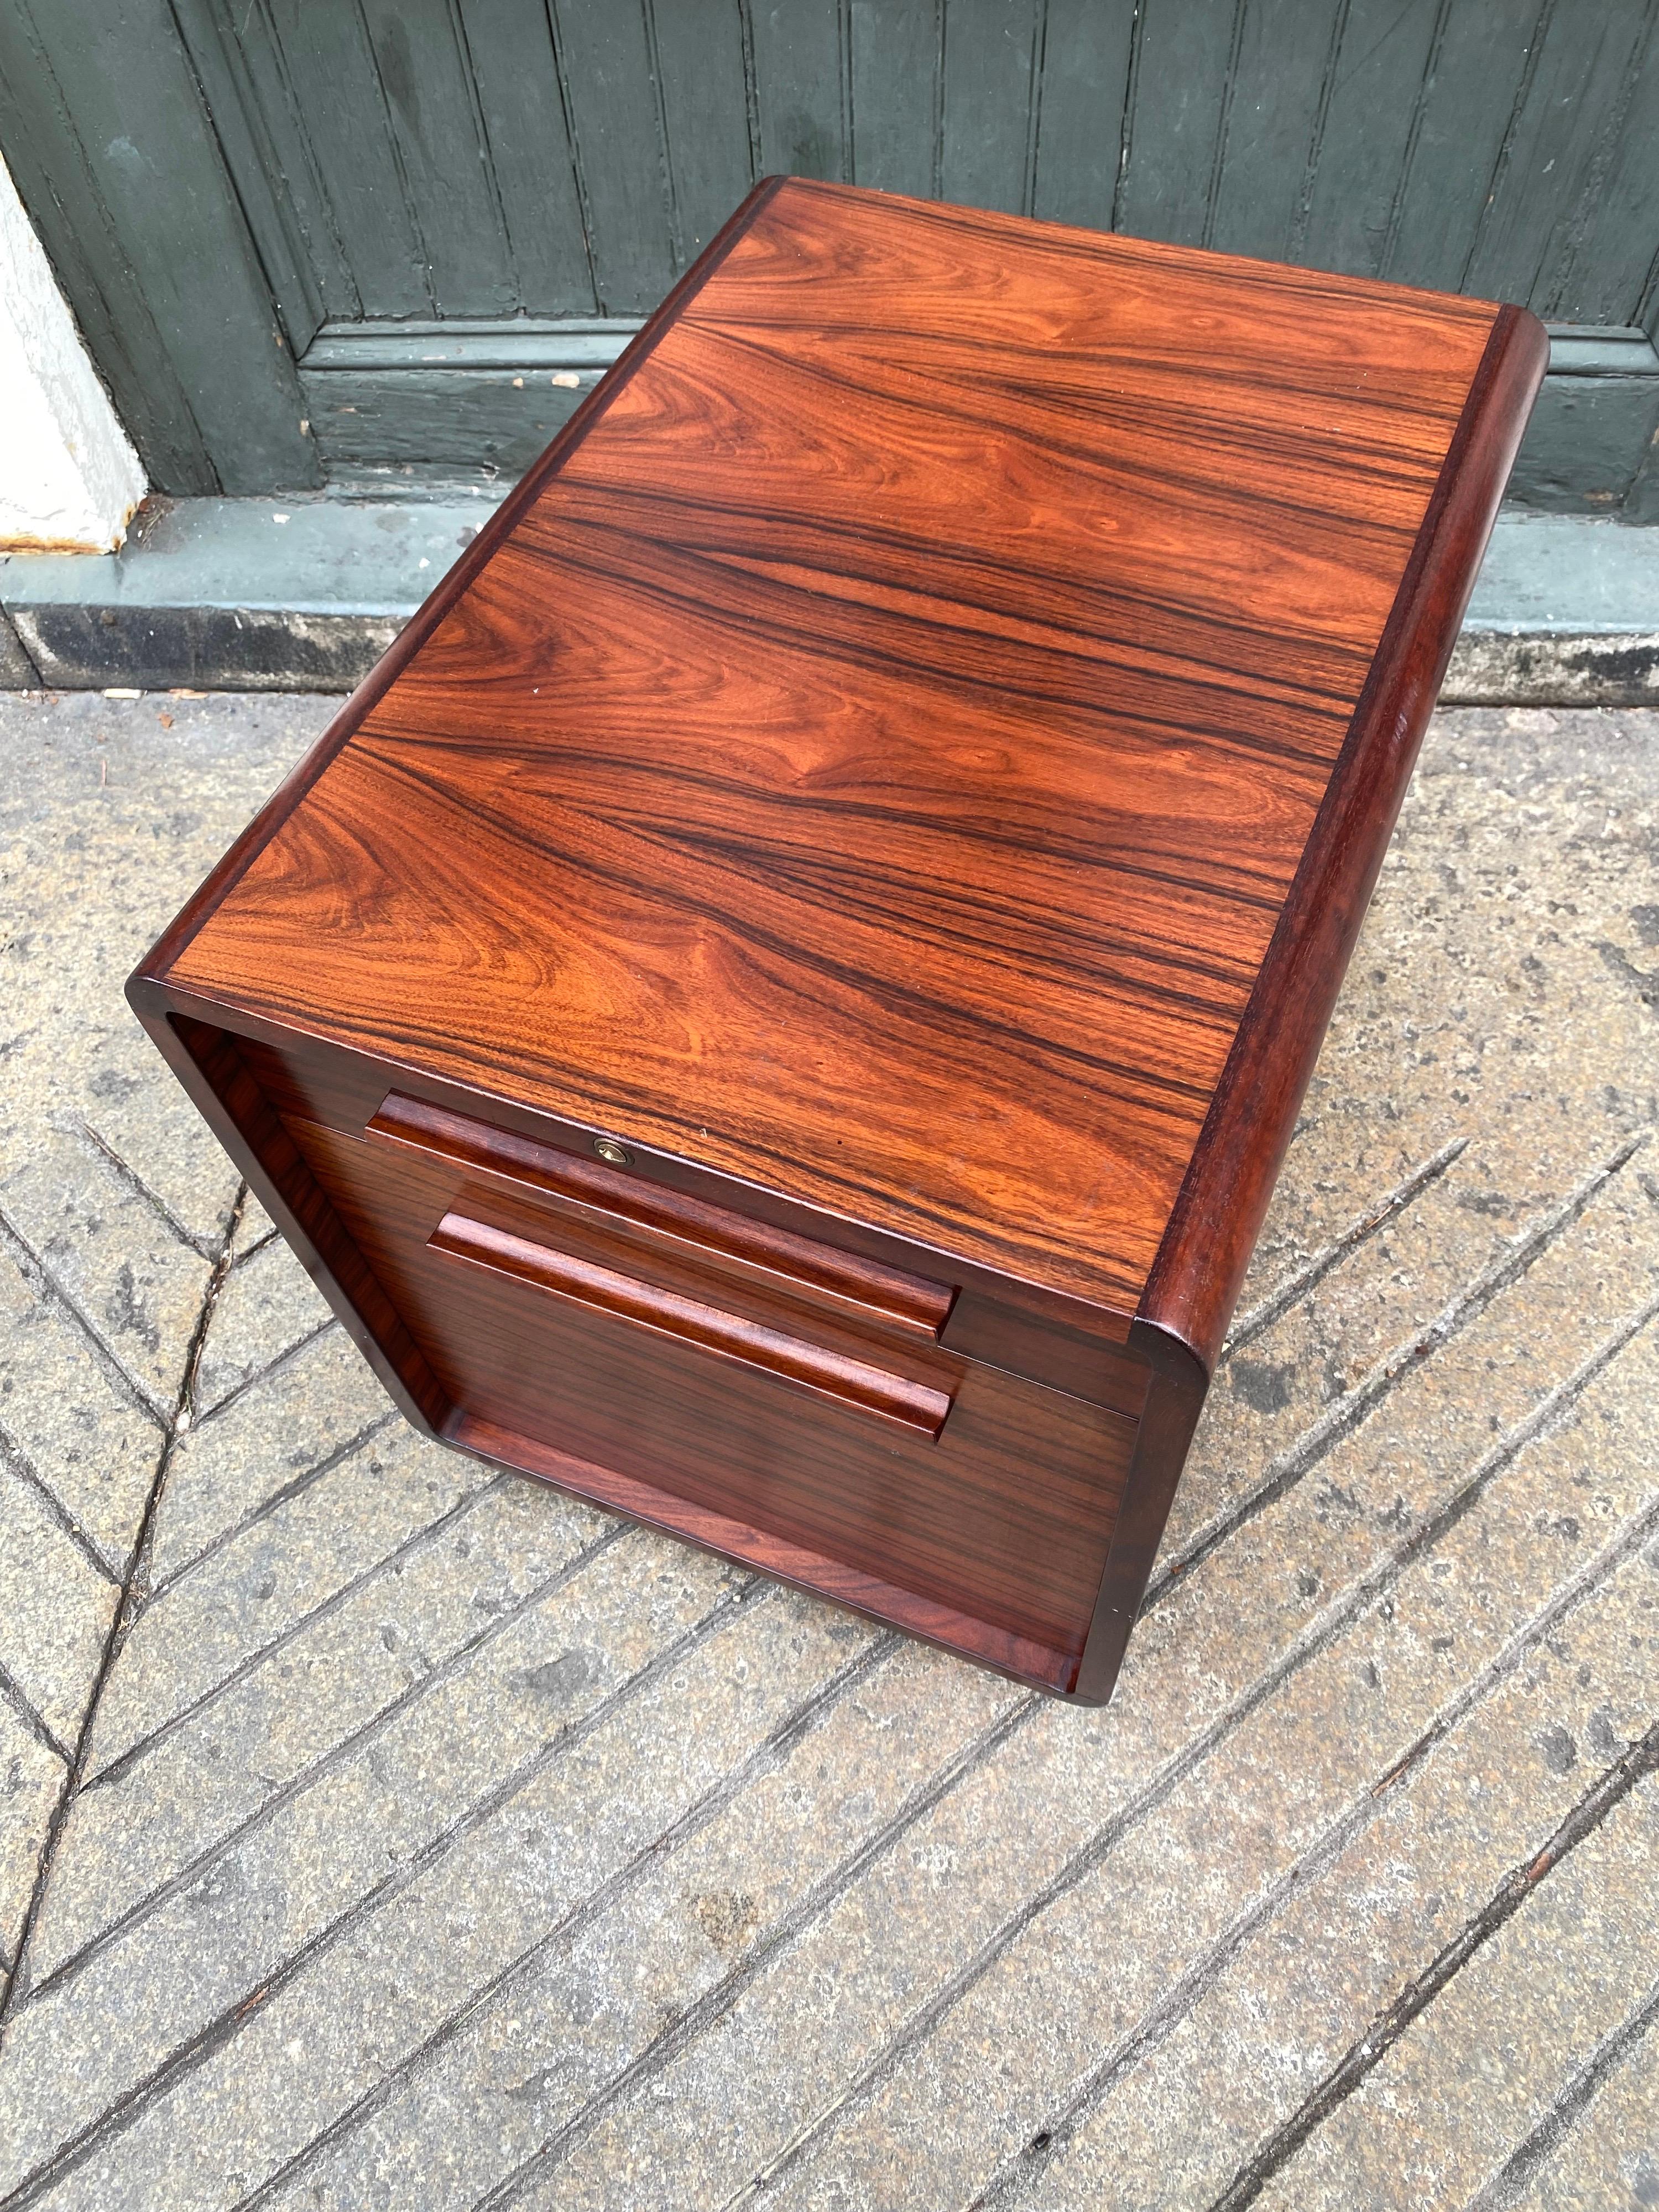 Dyrlund Rosewood Locking File cabinet on wheels. Bottom drawer is set up for hanging files. Rosewood is outstanding and in great shape! No fading, rosewood is rich and graining is very dramatic.  Cabinet has Key!